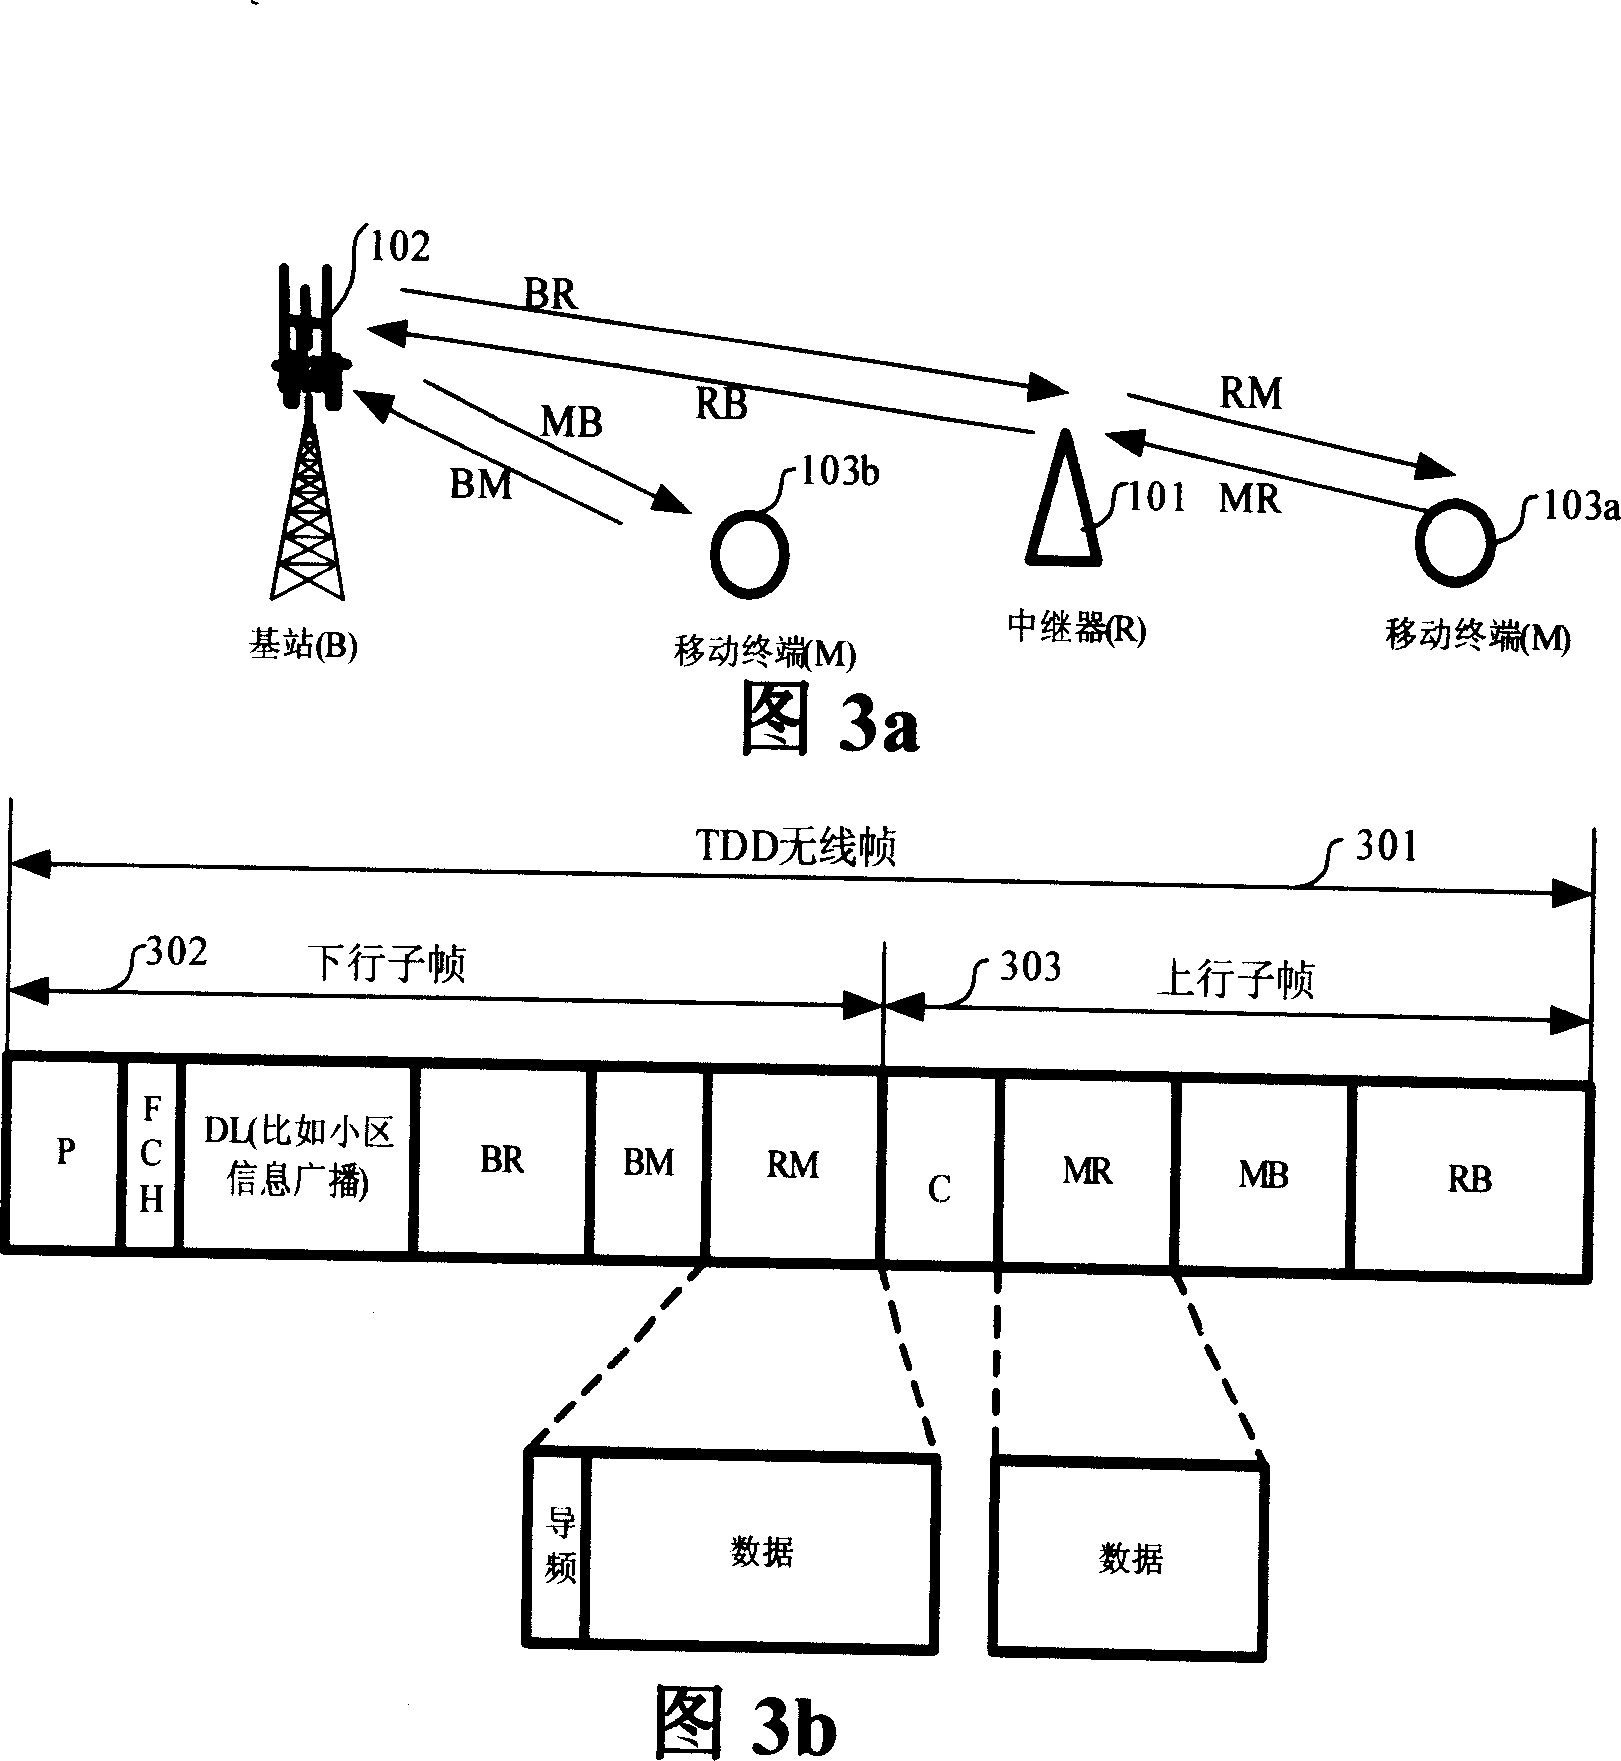 Double antenna wireless digital relay unit and its operating procedure and frame structure